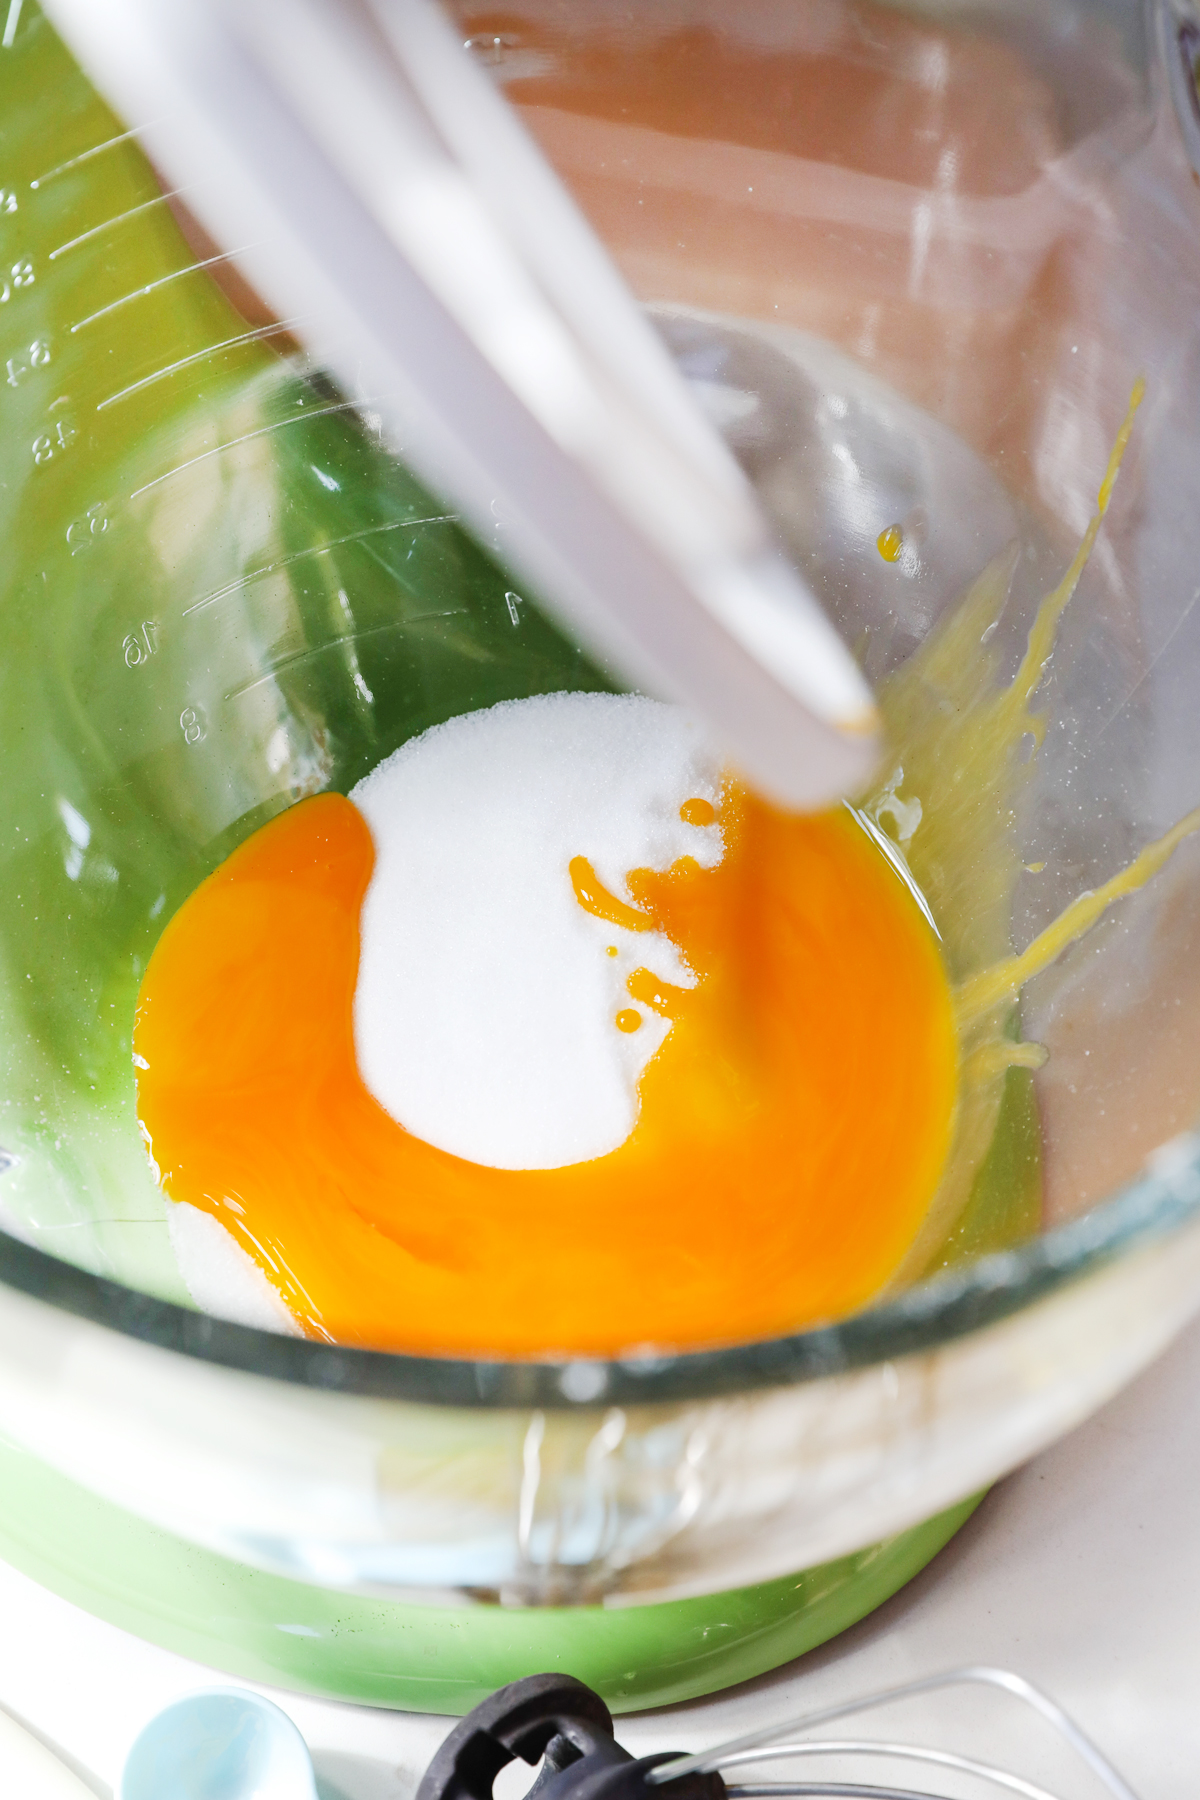 Egg yolks and sugar about to be mixed